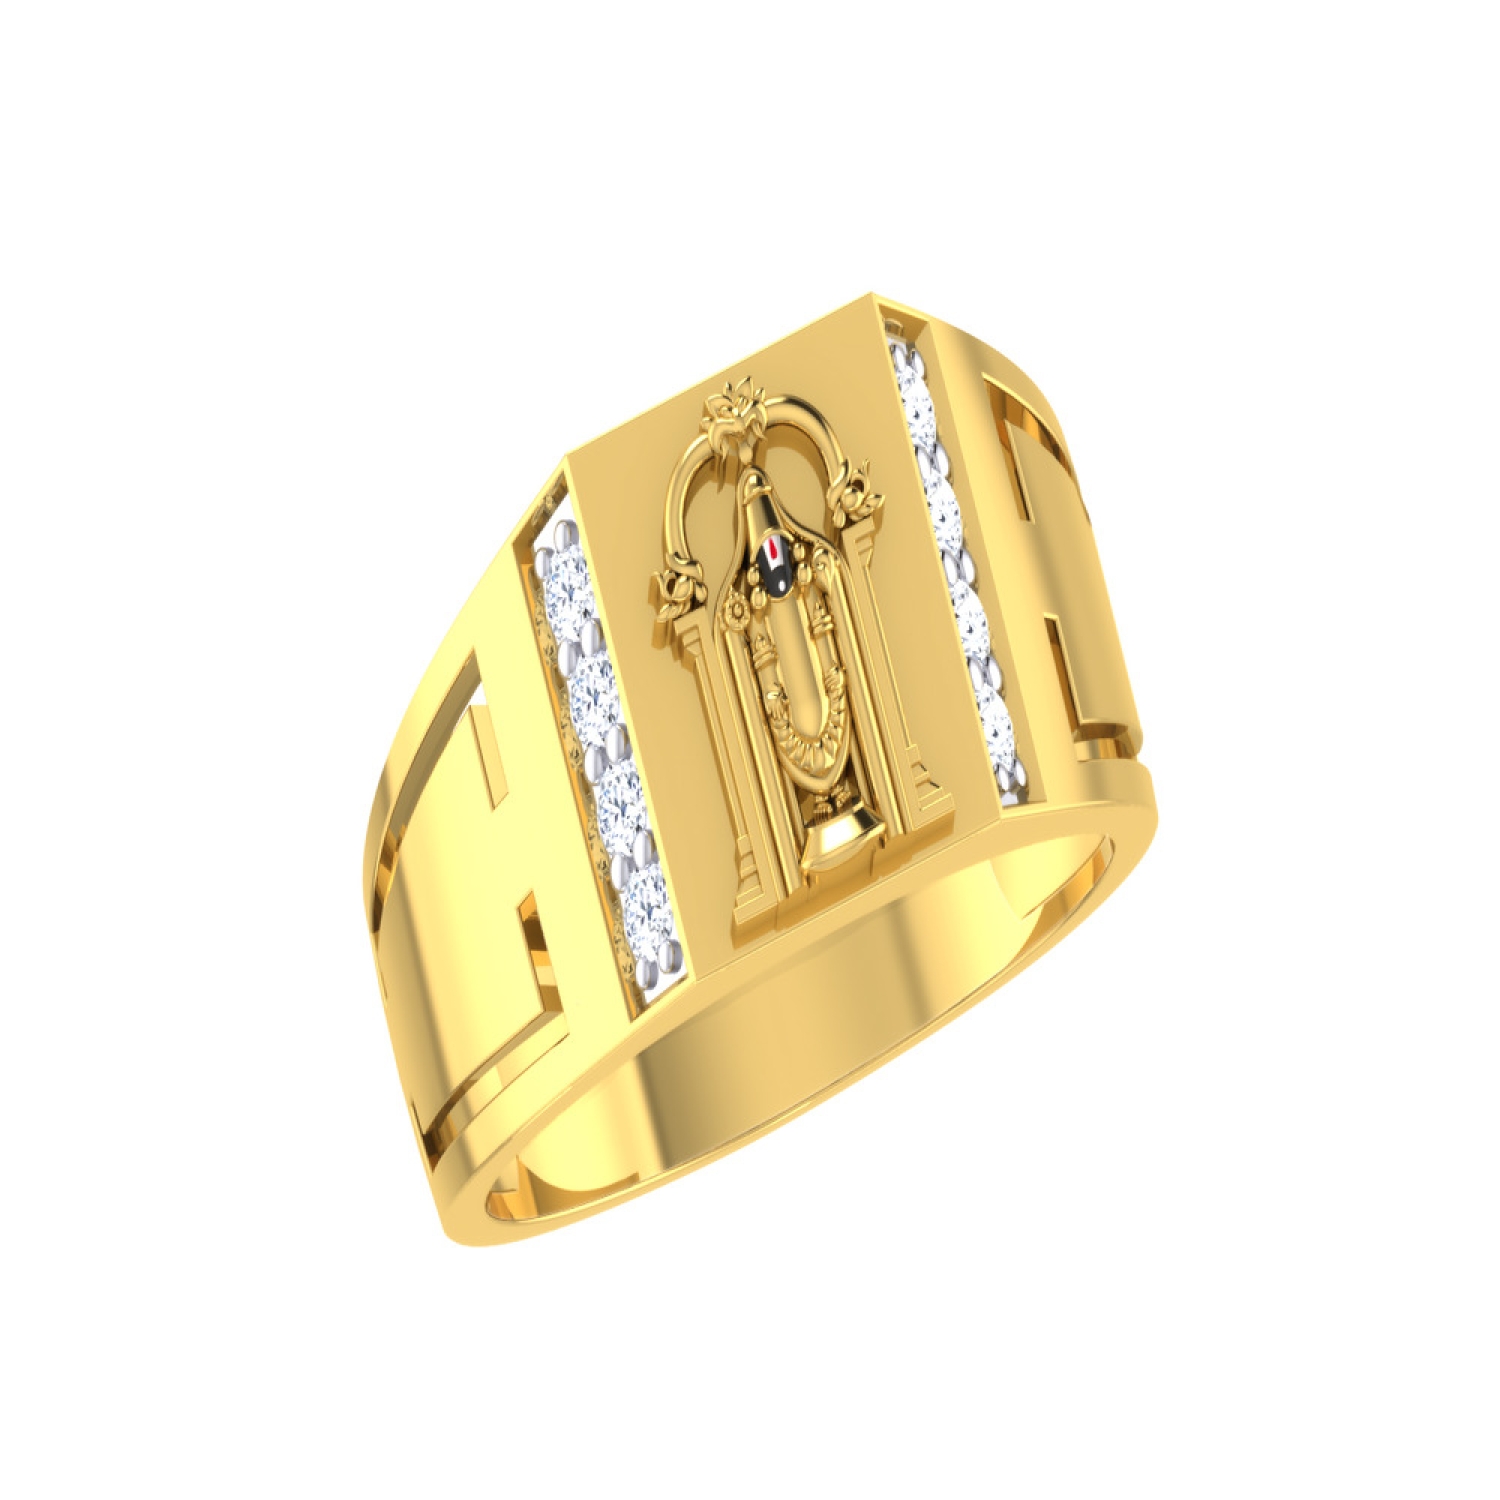 Buy 22K Gold Casting Lord Balaji Ring 97VL6224 Online from Vaibhav Jewellers